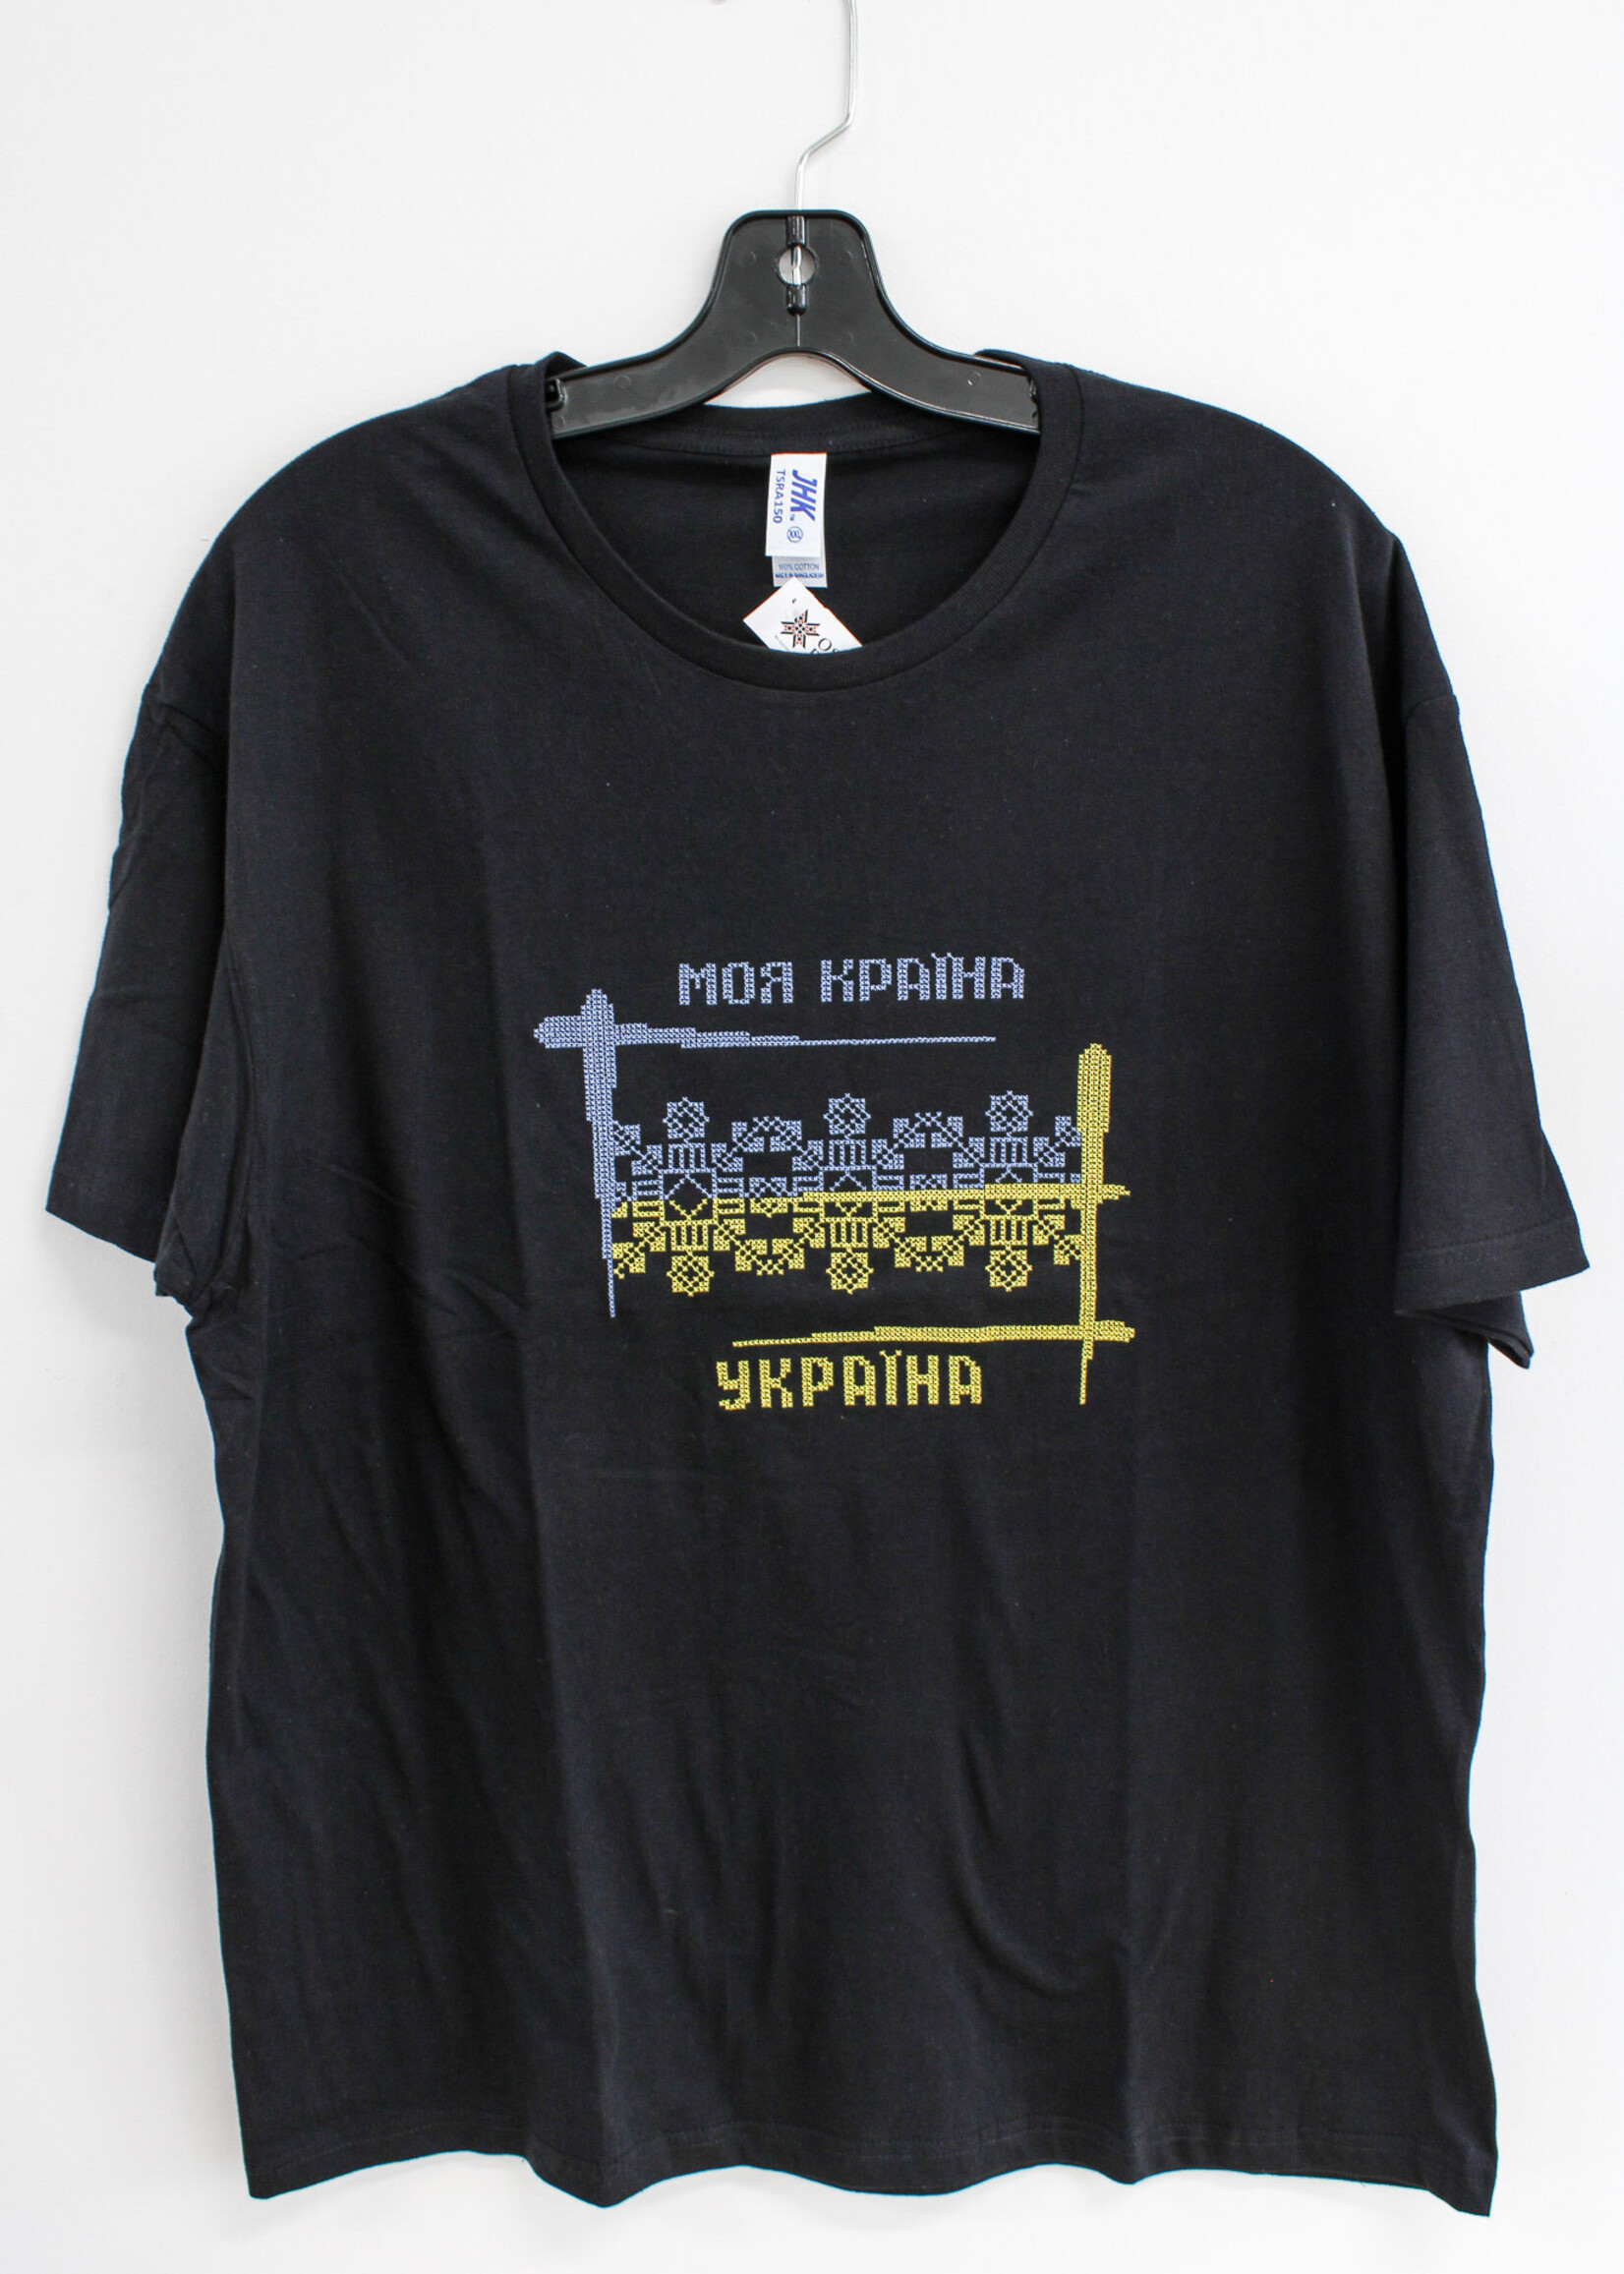 APPAREL -T- SHIRT - (M) Black "My Country is Ukraine" with Blue/Yellow Stitching